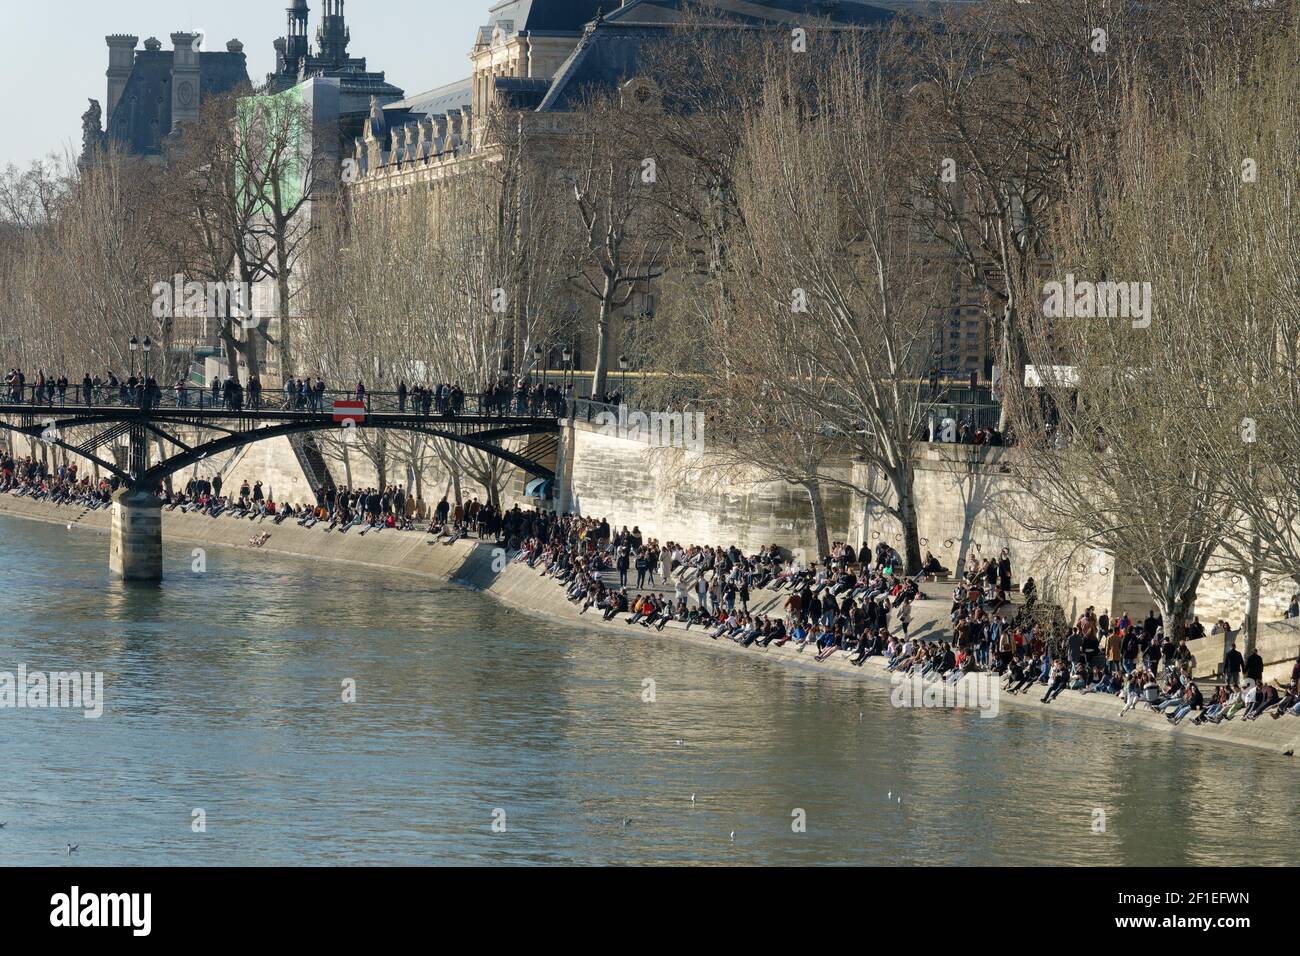 Crowds of people enjoying the sunny weather in Paris during Covid-19 pandemic Stock Photo